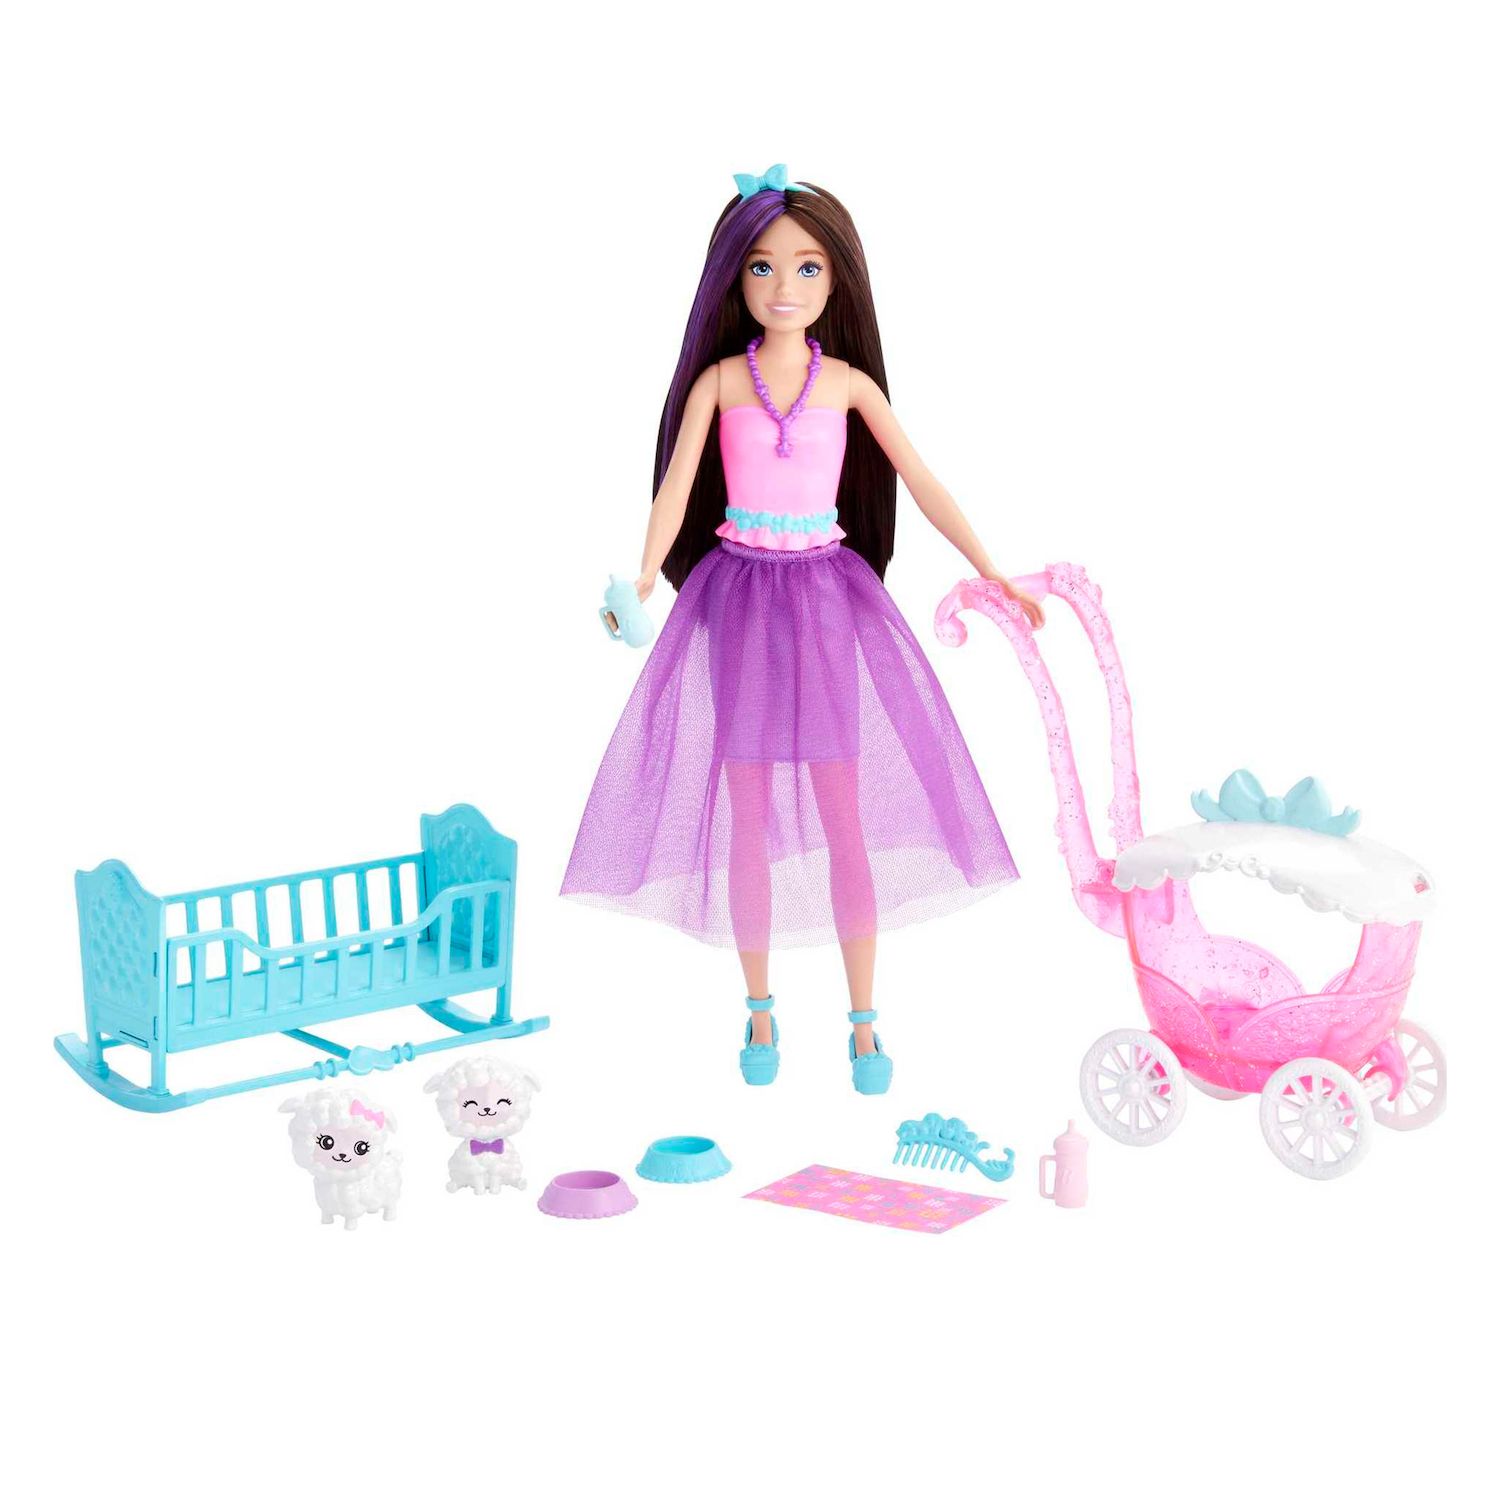 Barbie - Welcome to Barbie Dreamtopia! A magical new series from